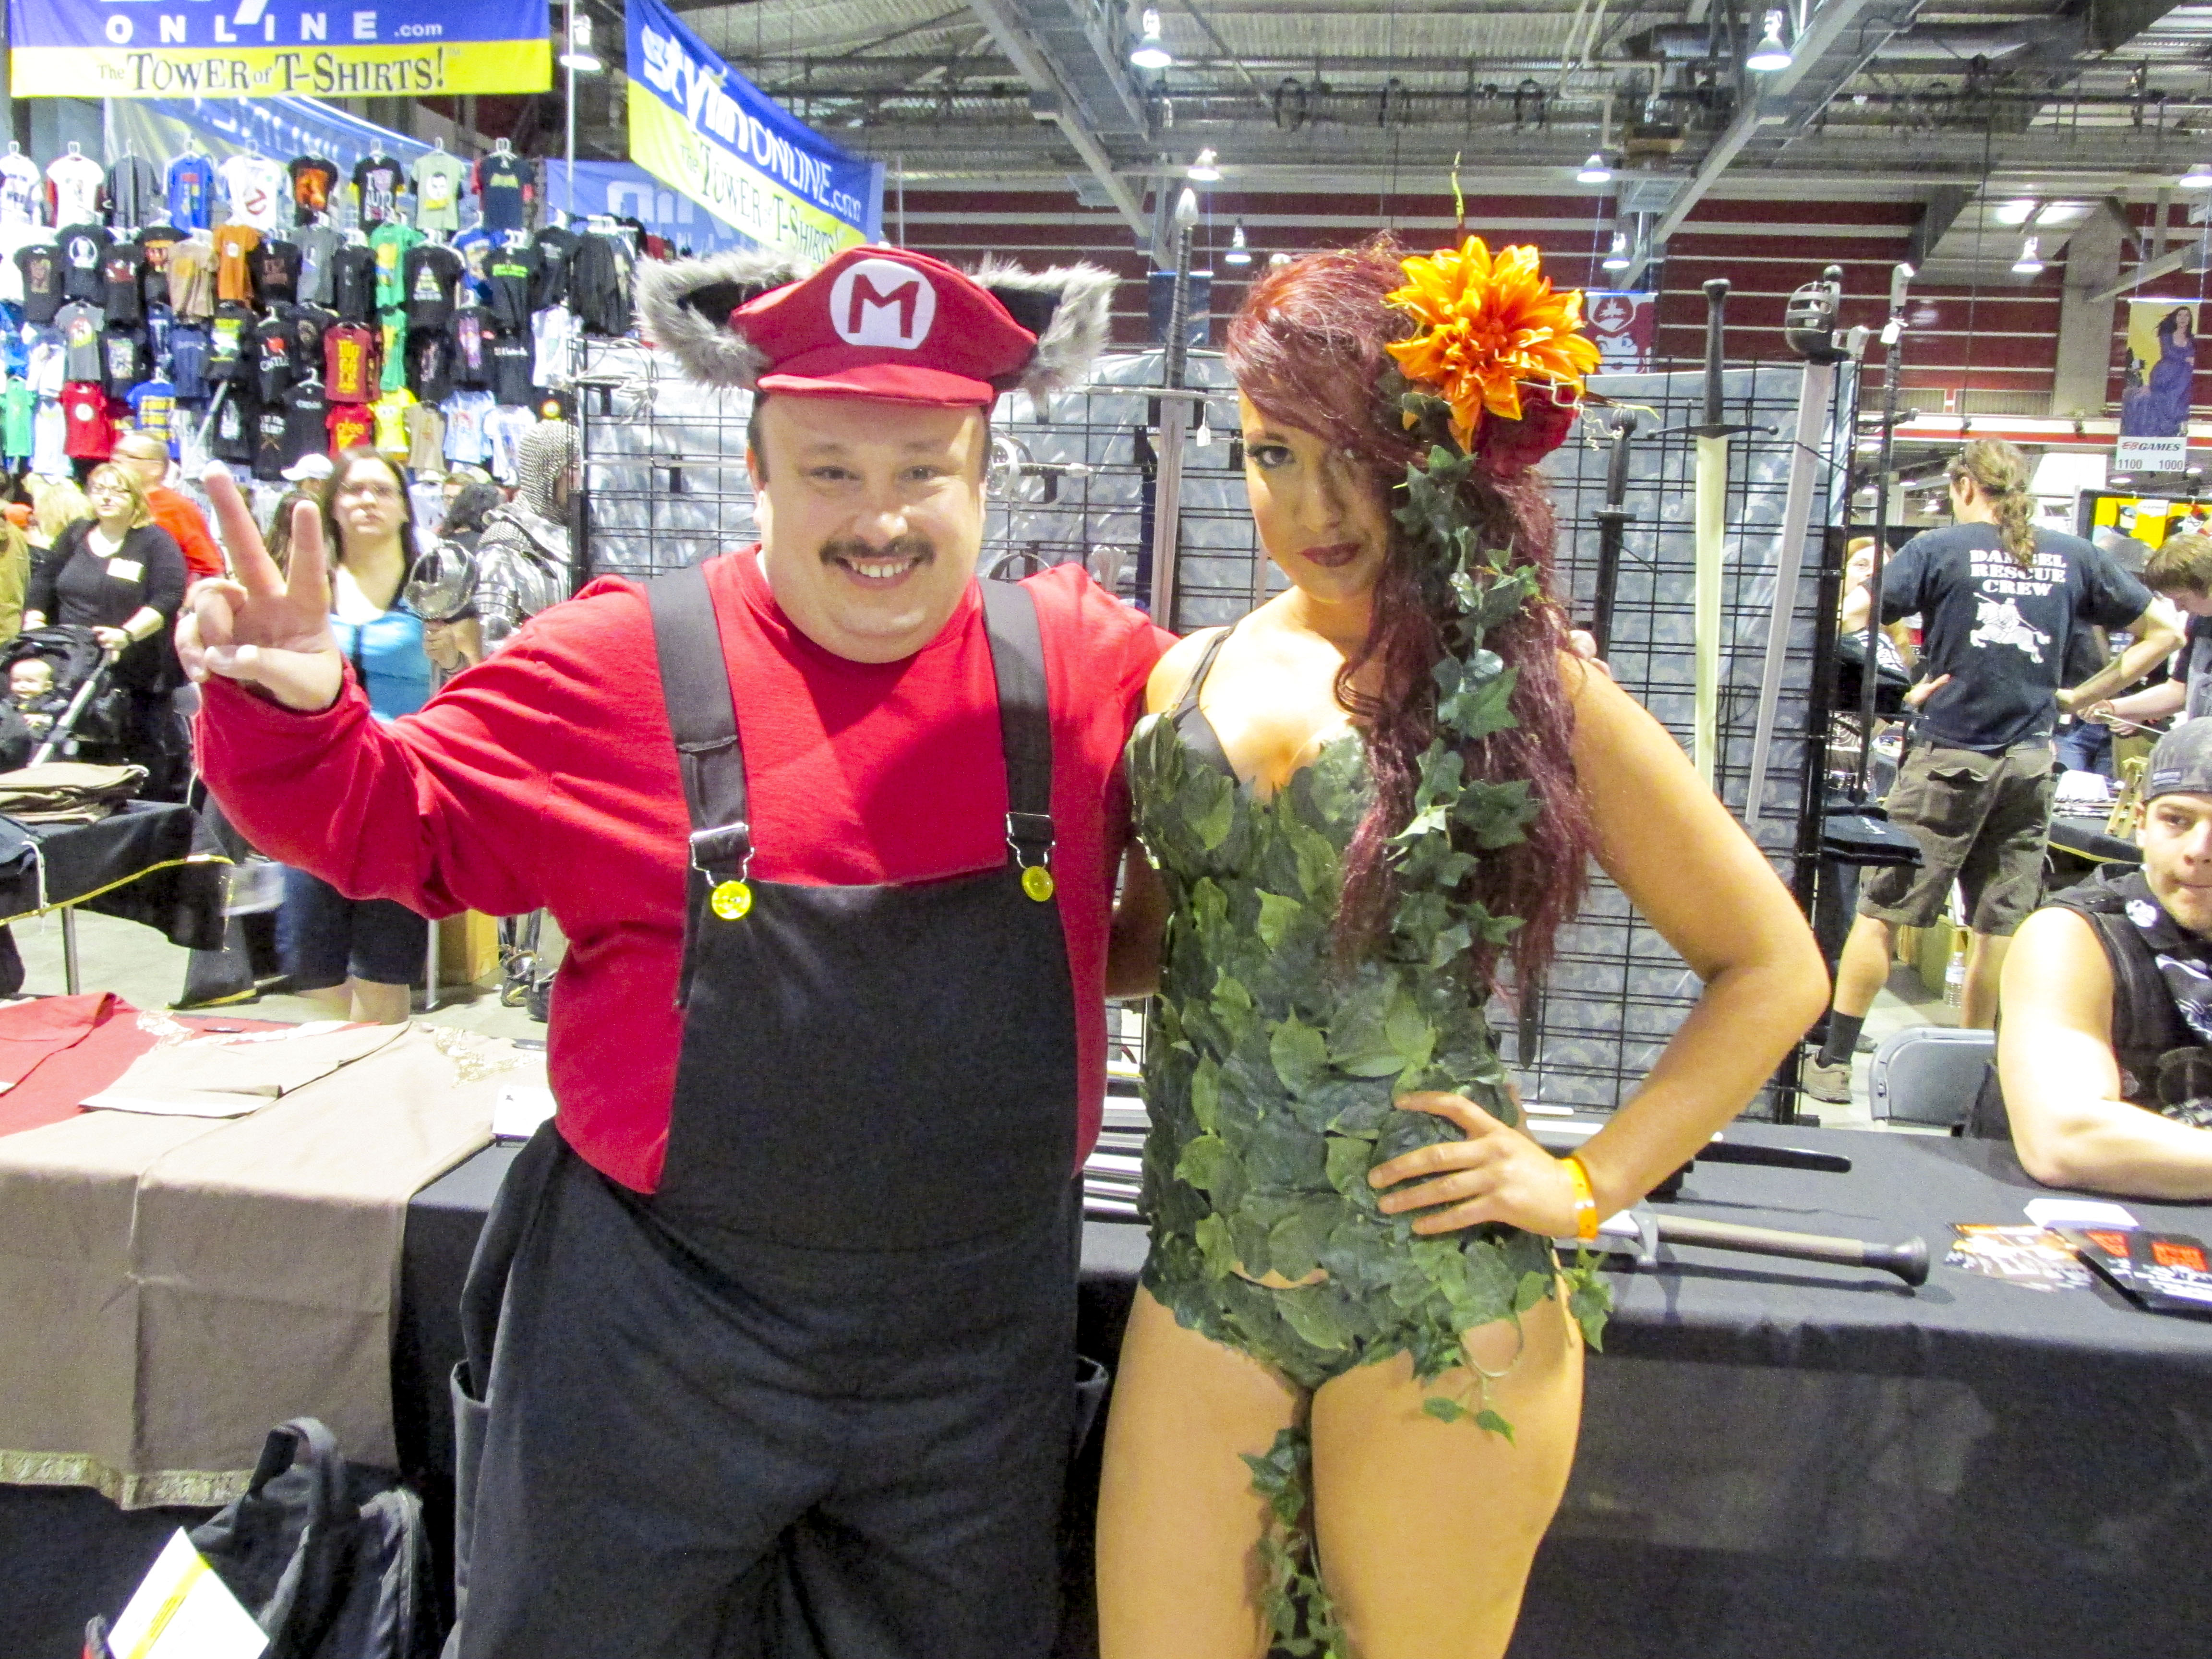 Hotty Poison Ivy takes time to pose with Mario!